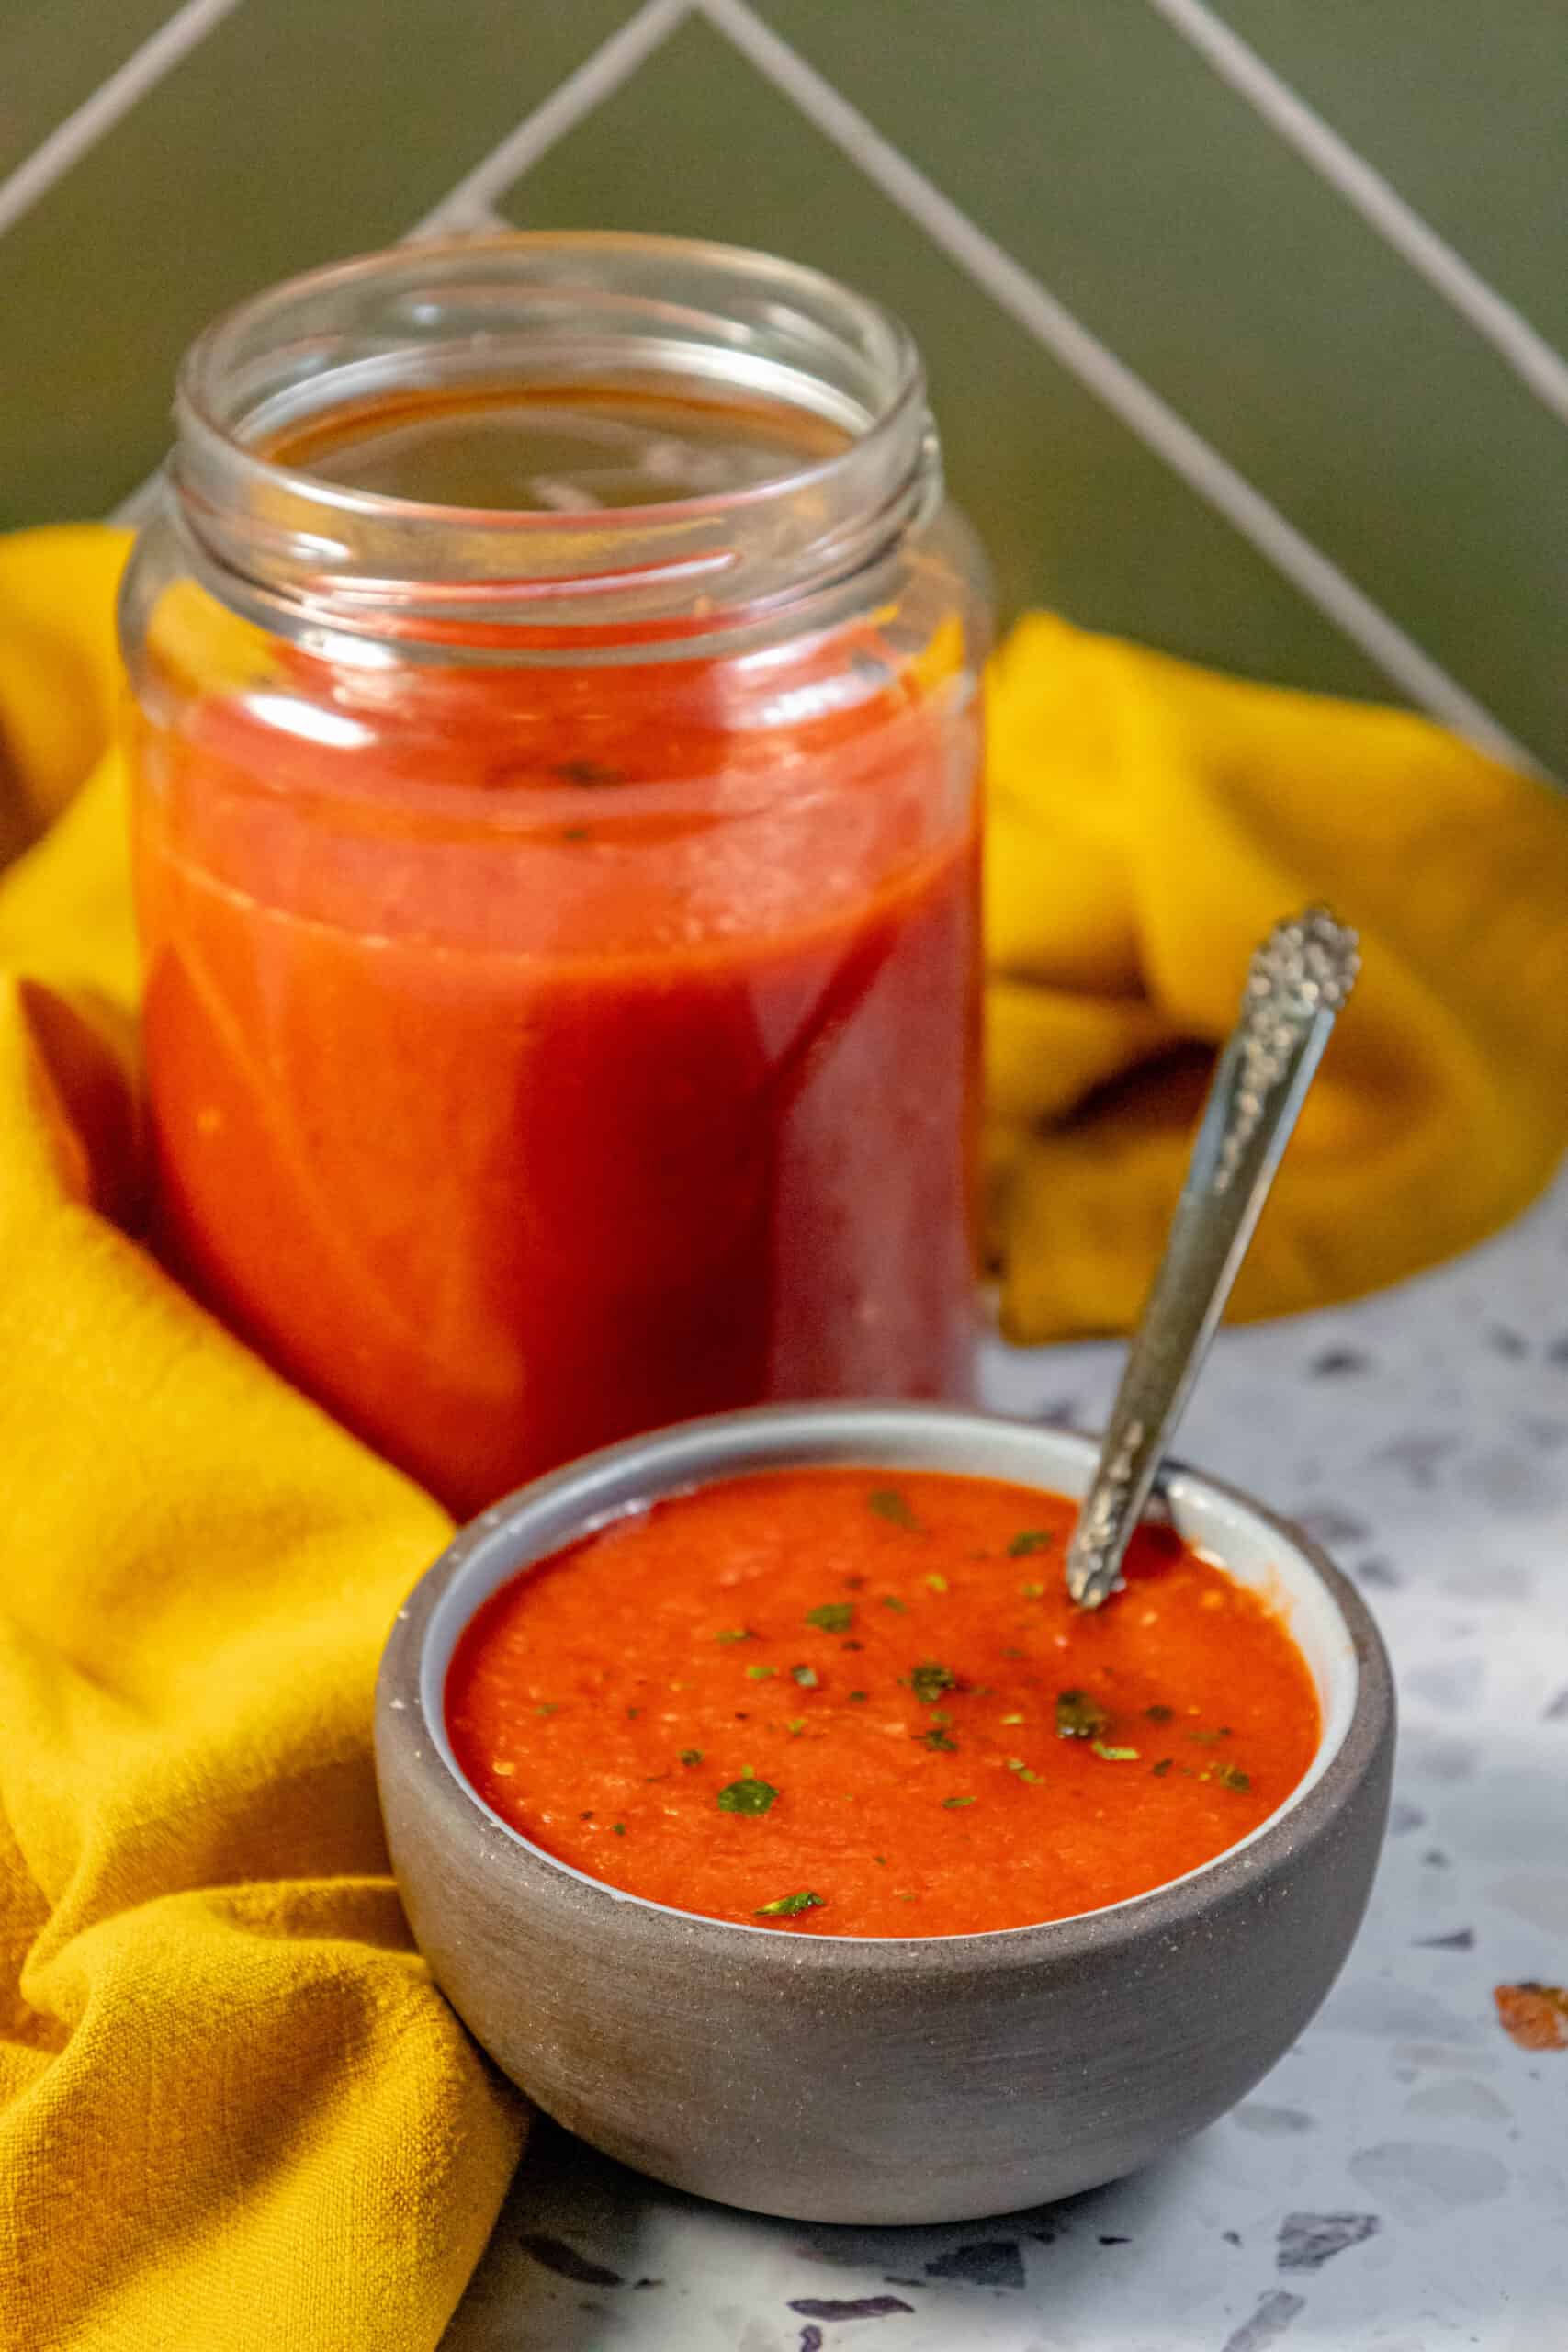 A jar of tomato soup with a spoon next to it, perfect for a comforting meal.